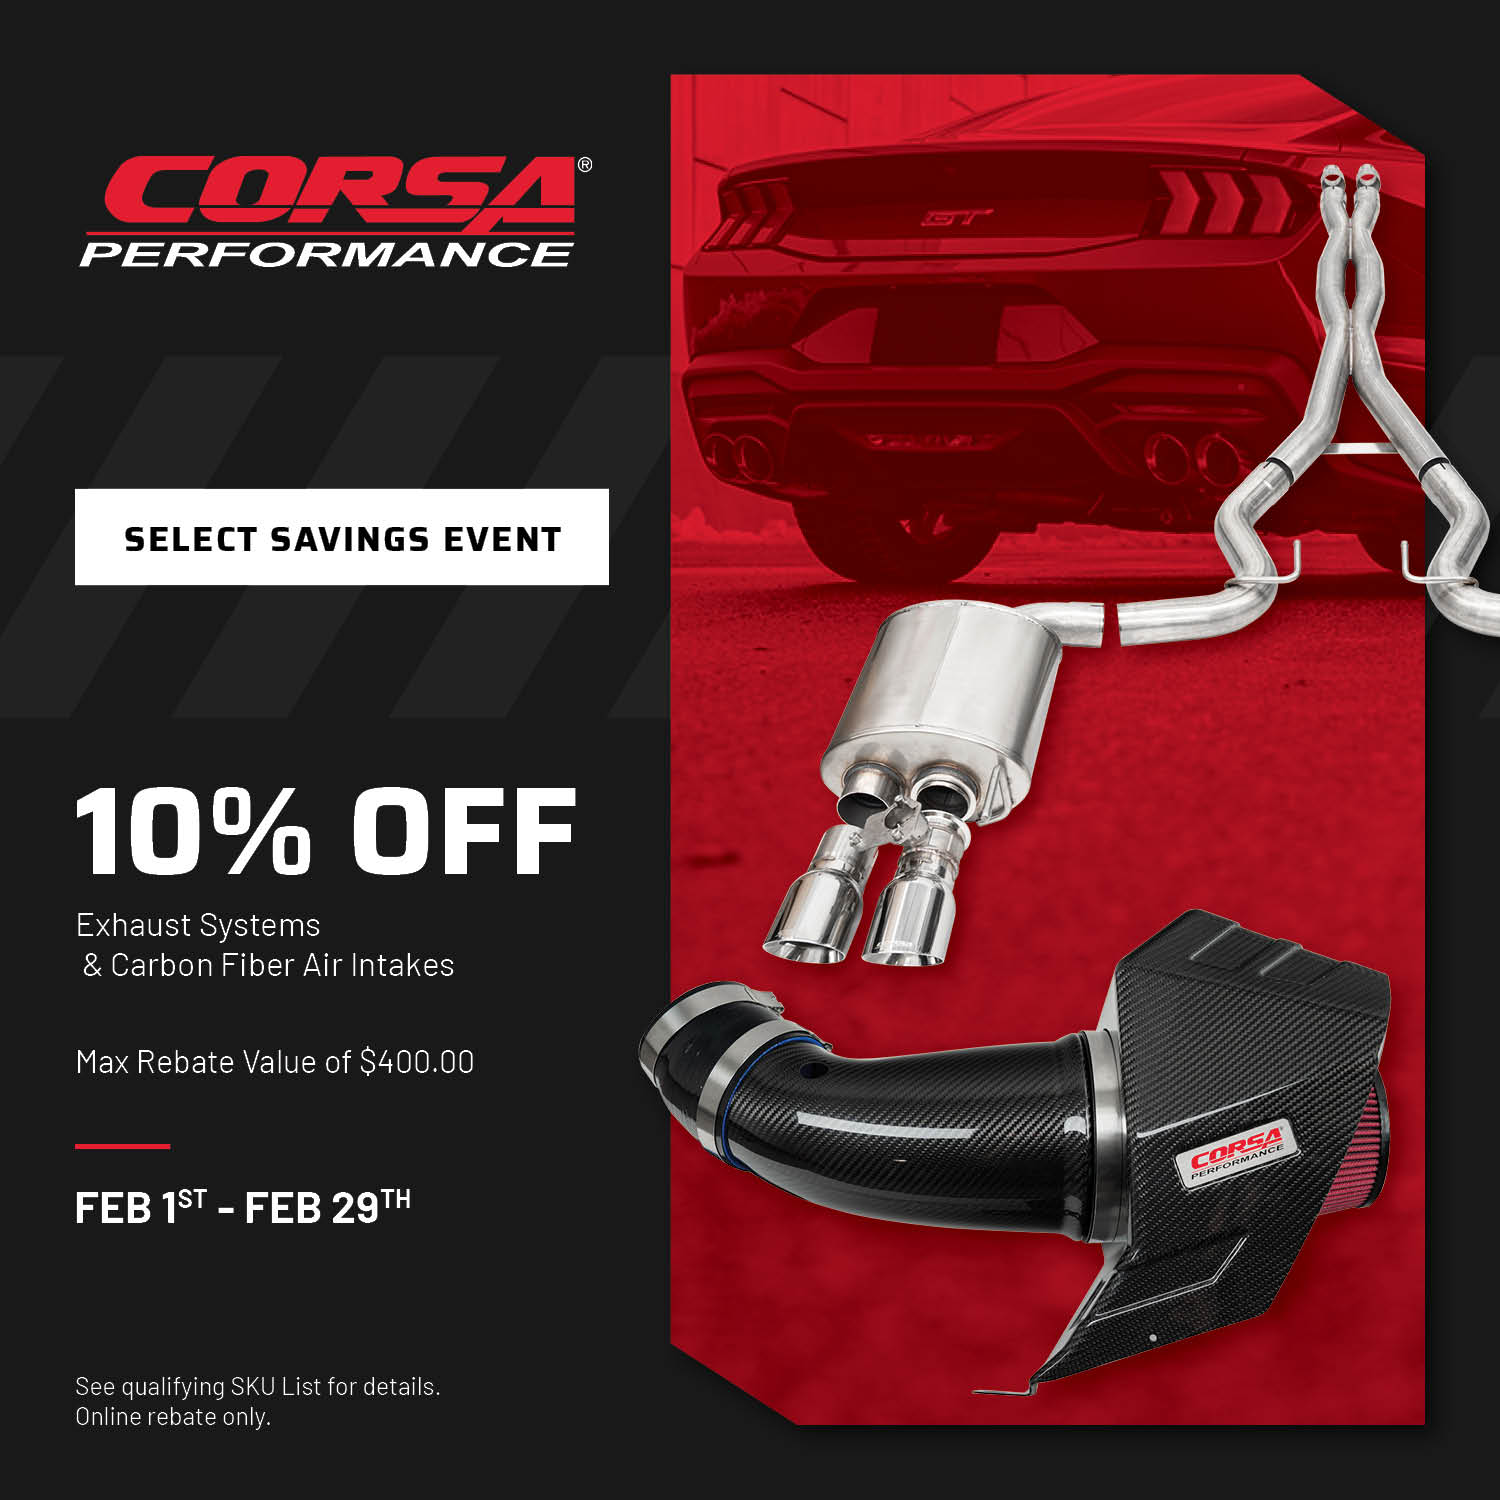 Shop for your CORSA Exhaust Systems & Intakes